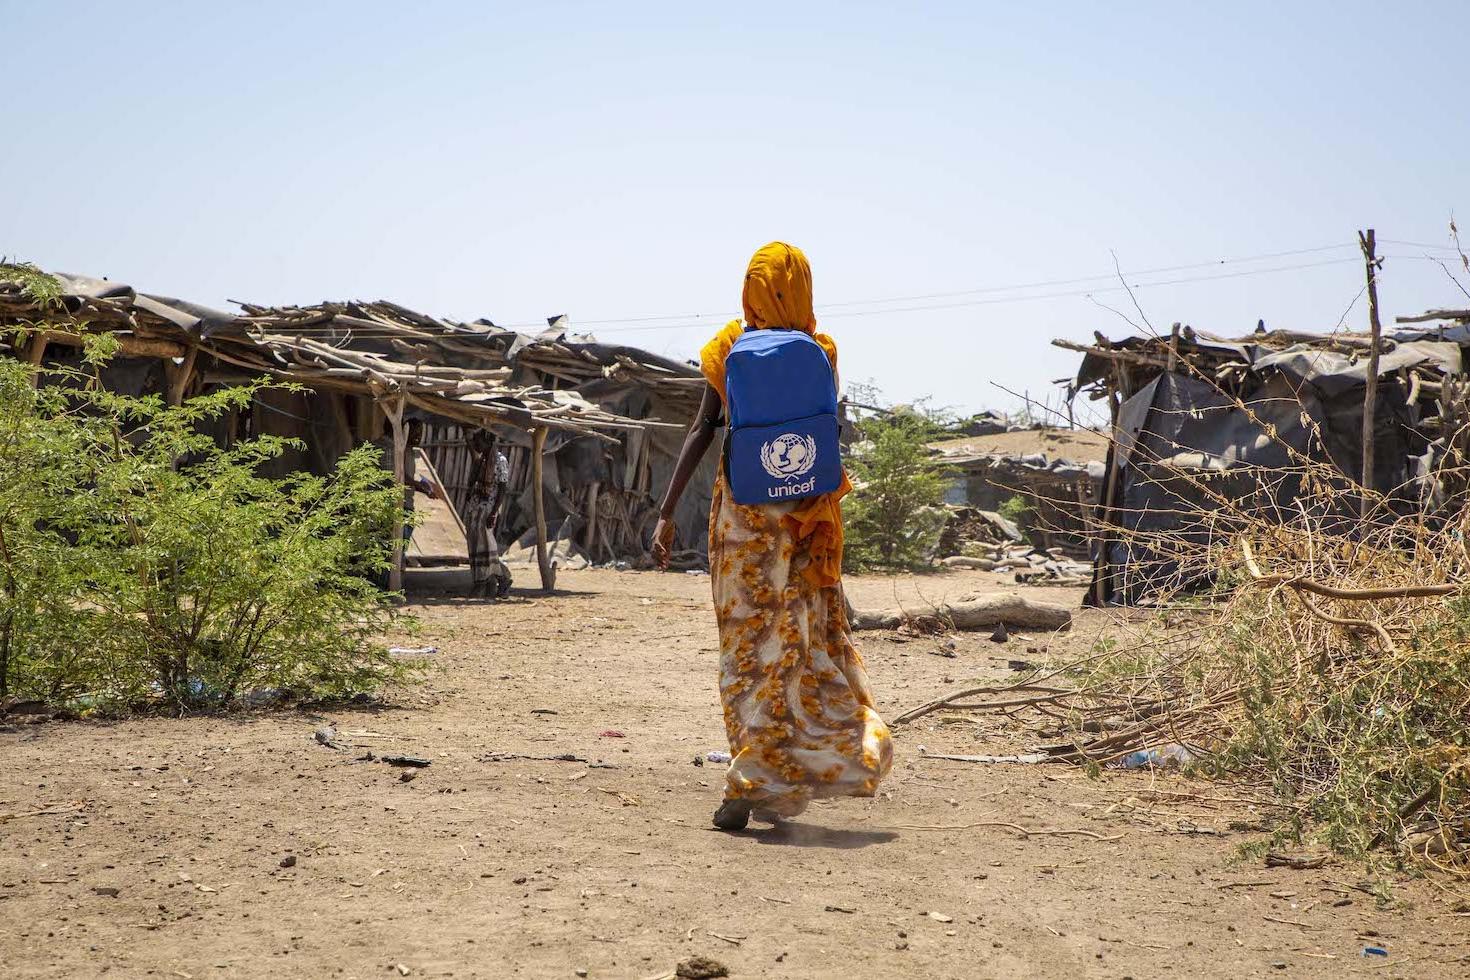 climate change refugee miriam who was displaced by floods in northern ethiopia walks to school with unicef backpack